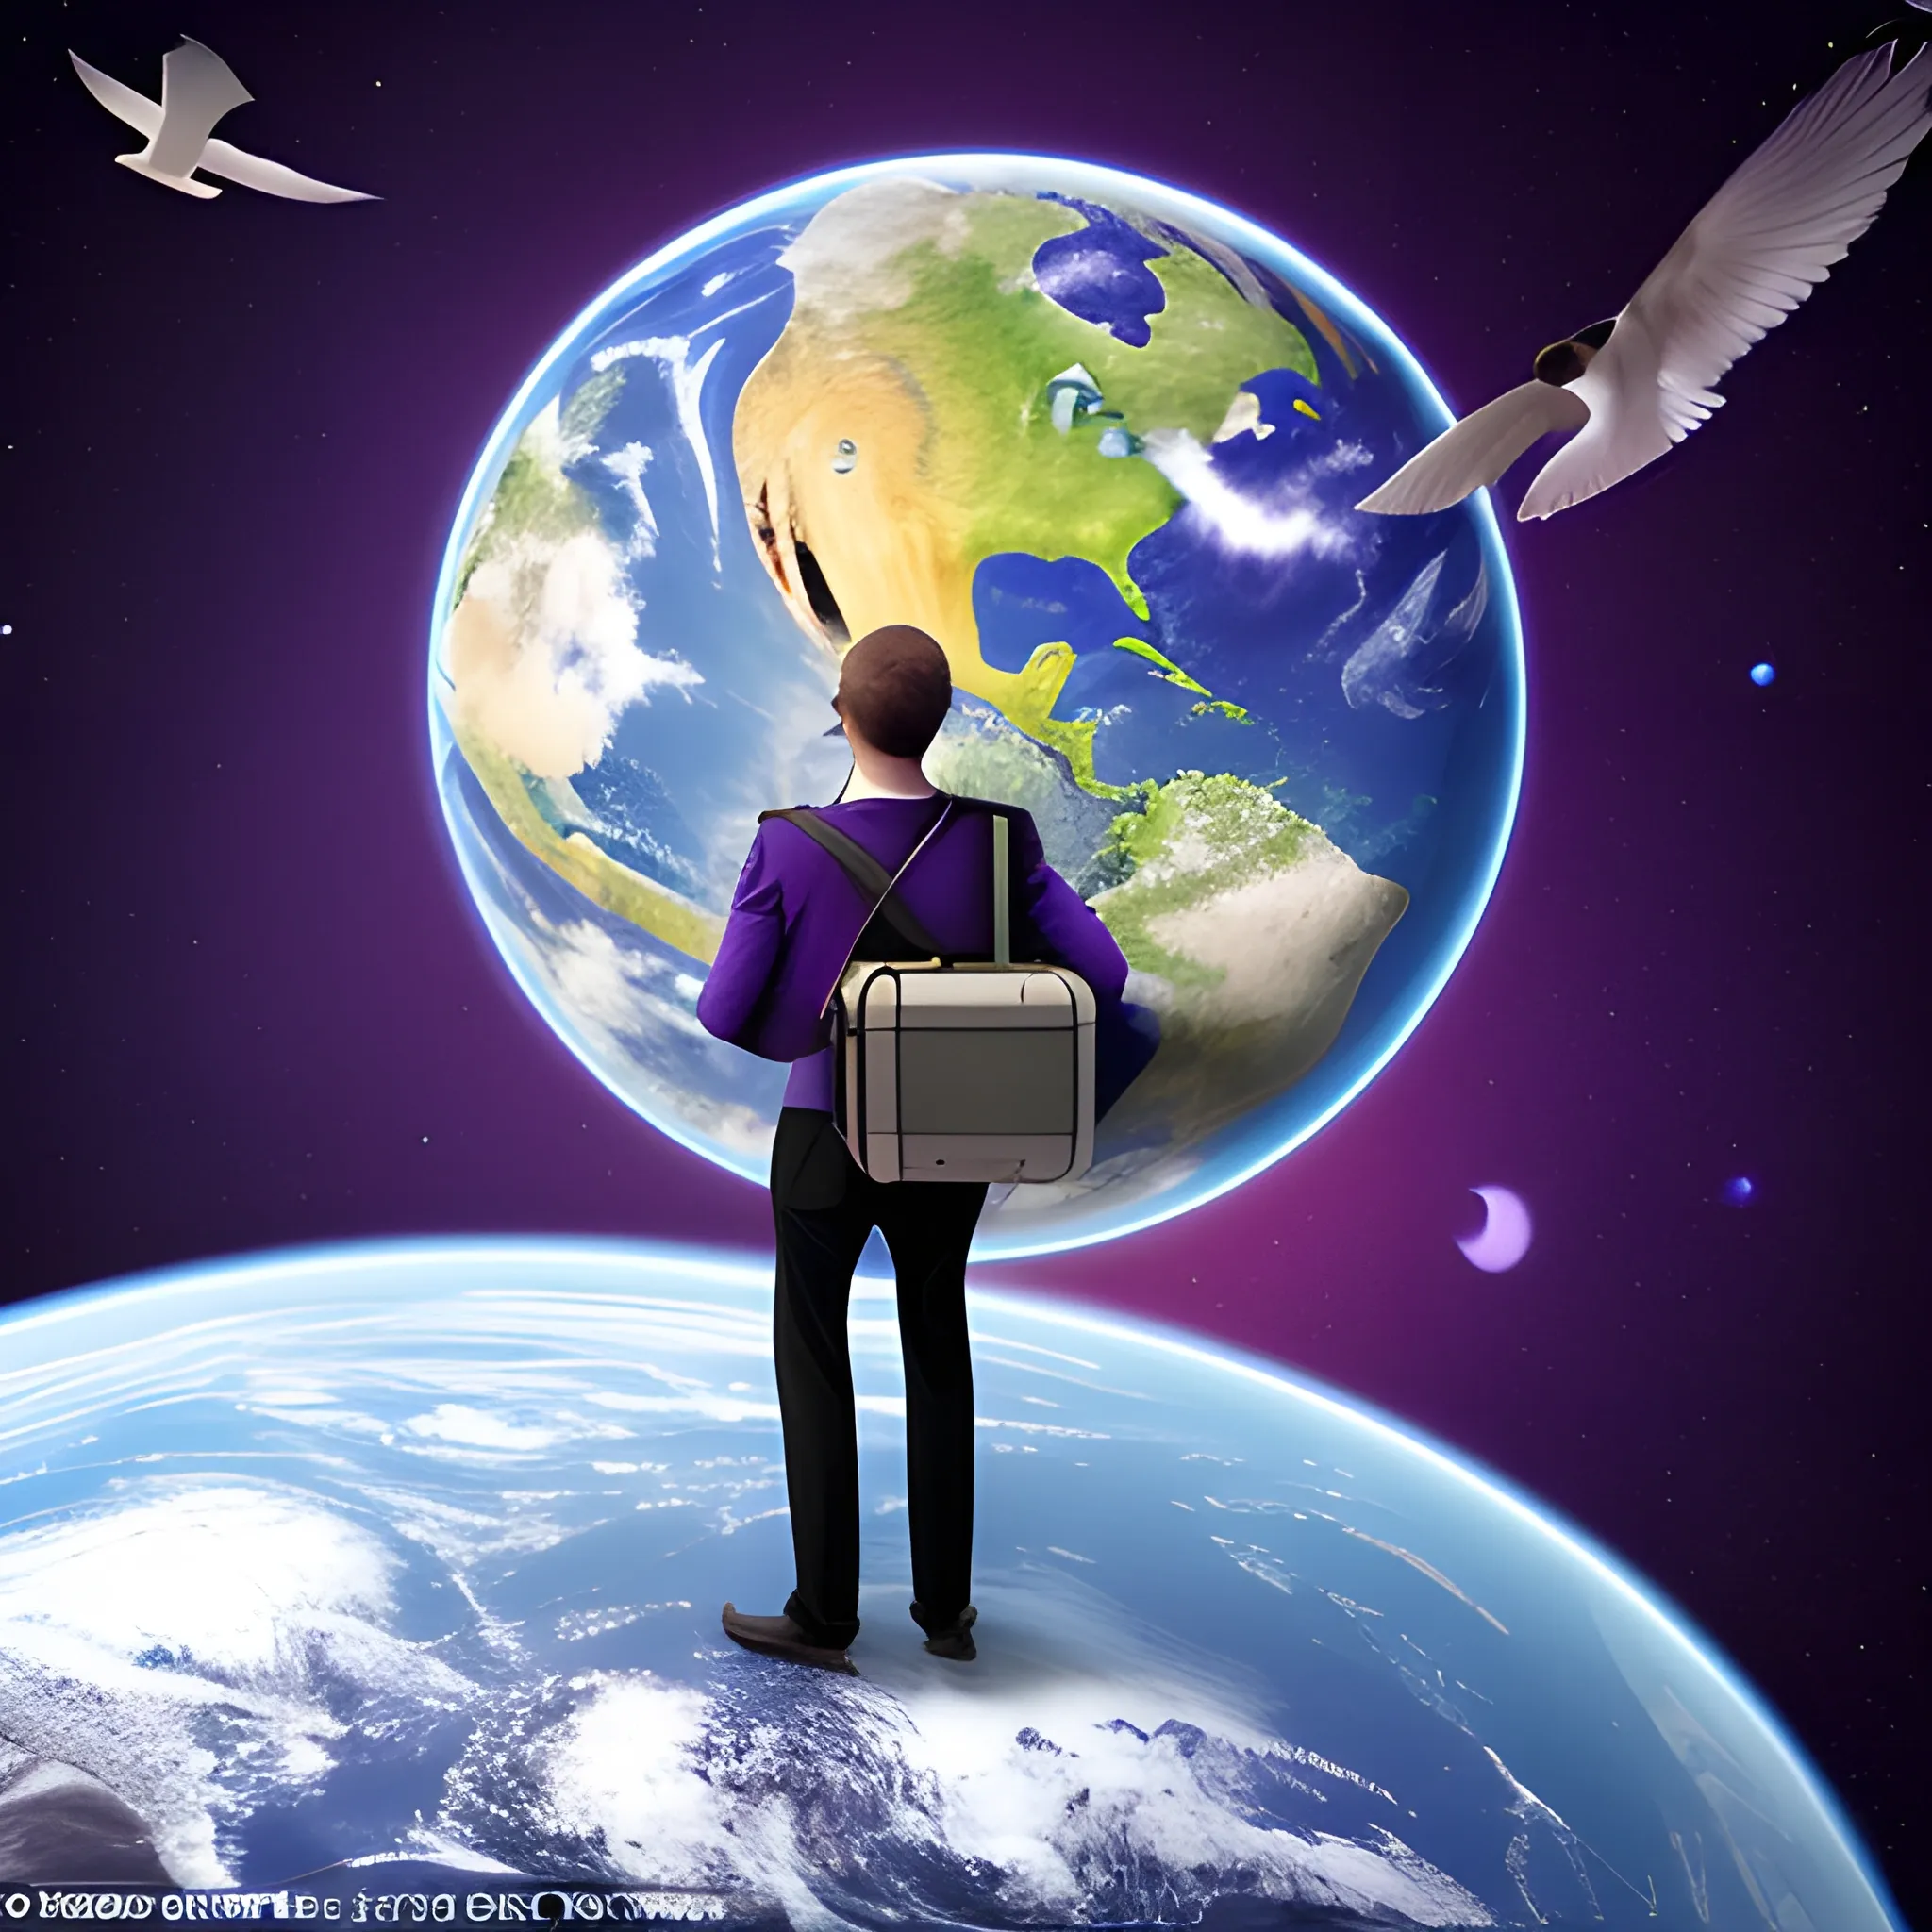 planet earth in a flat view, a man with a suitcase is standing on it, with a restrained look, birds are flying above him, all this is depicted on a purple restrained background 256000k